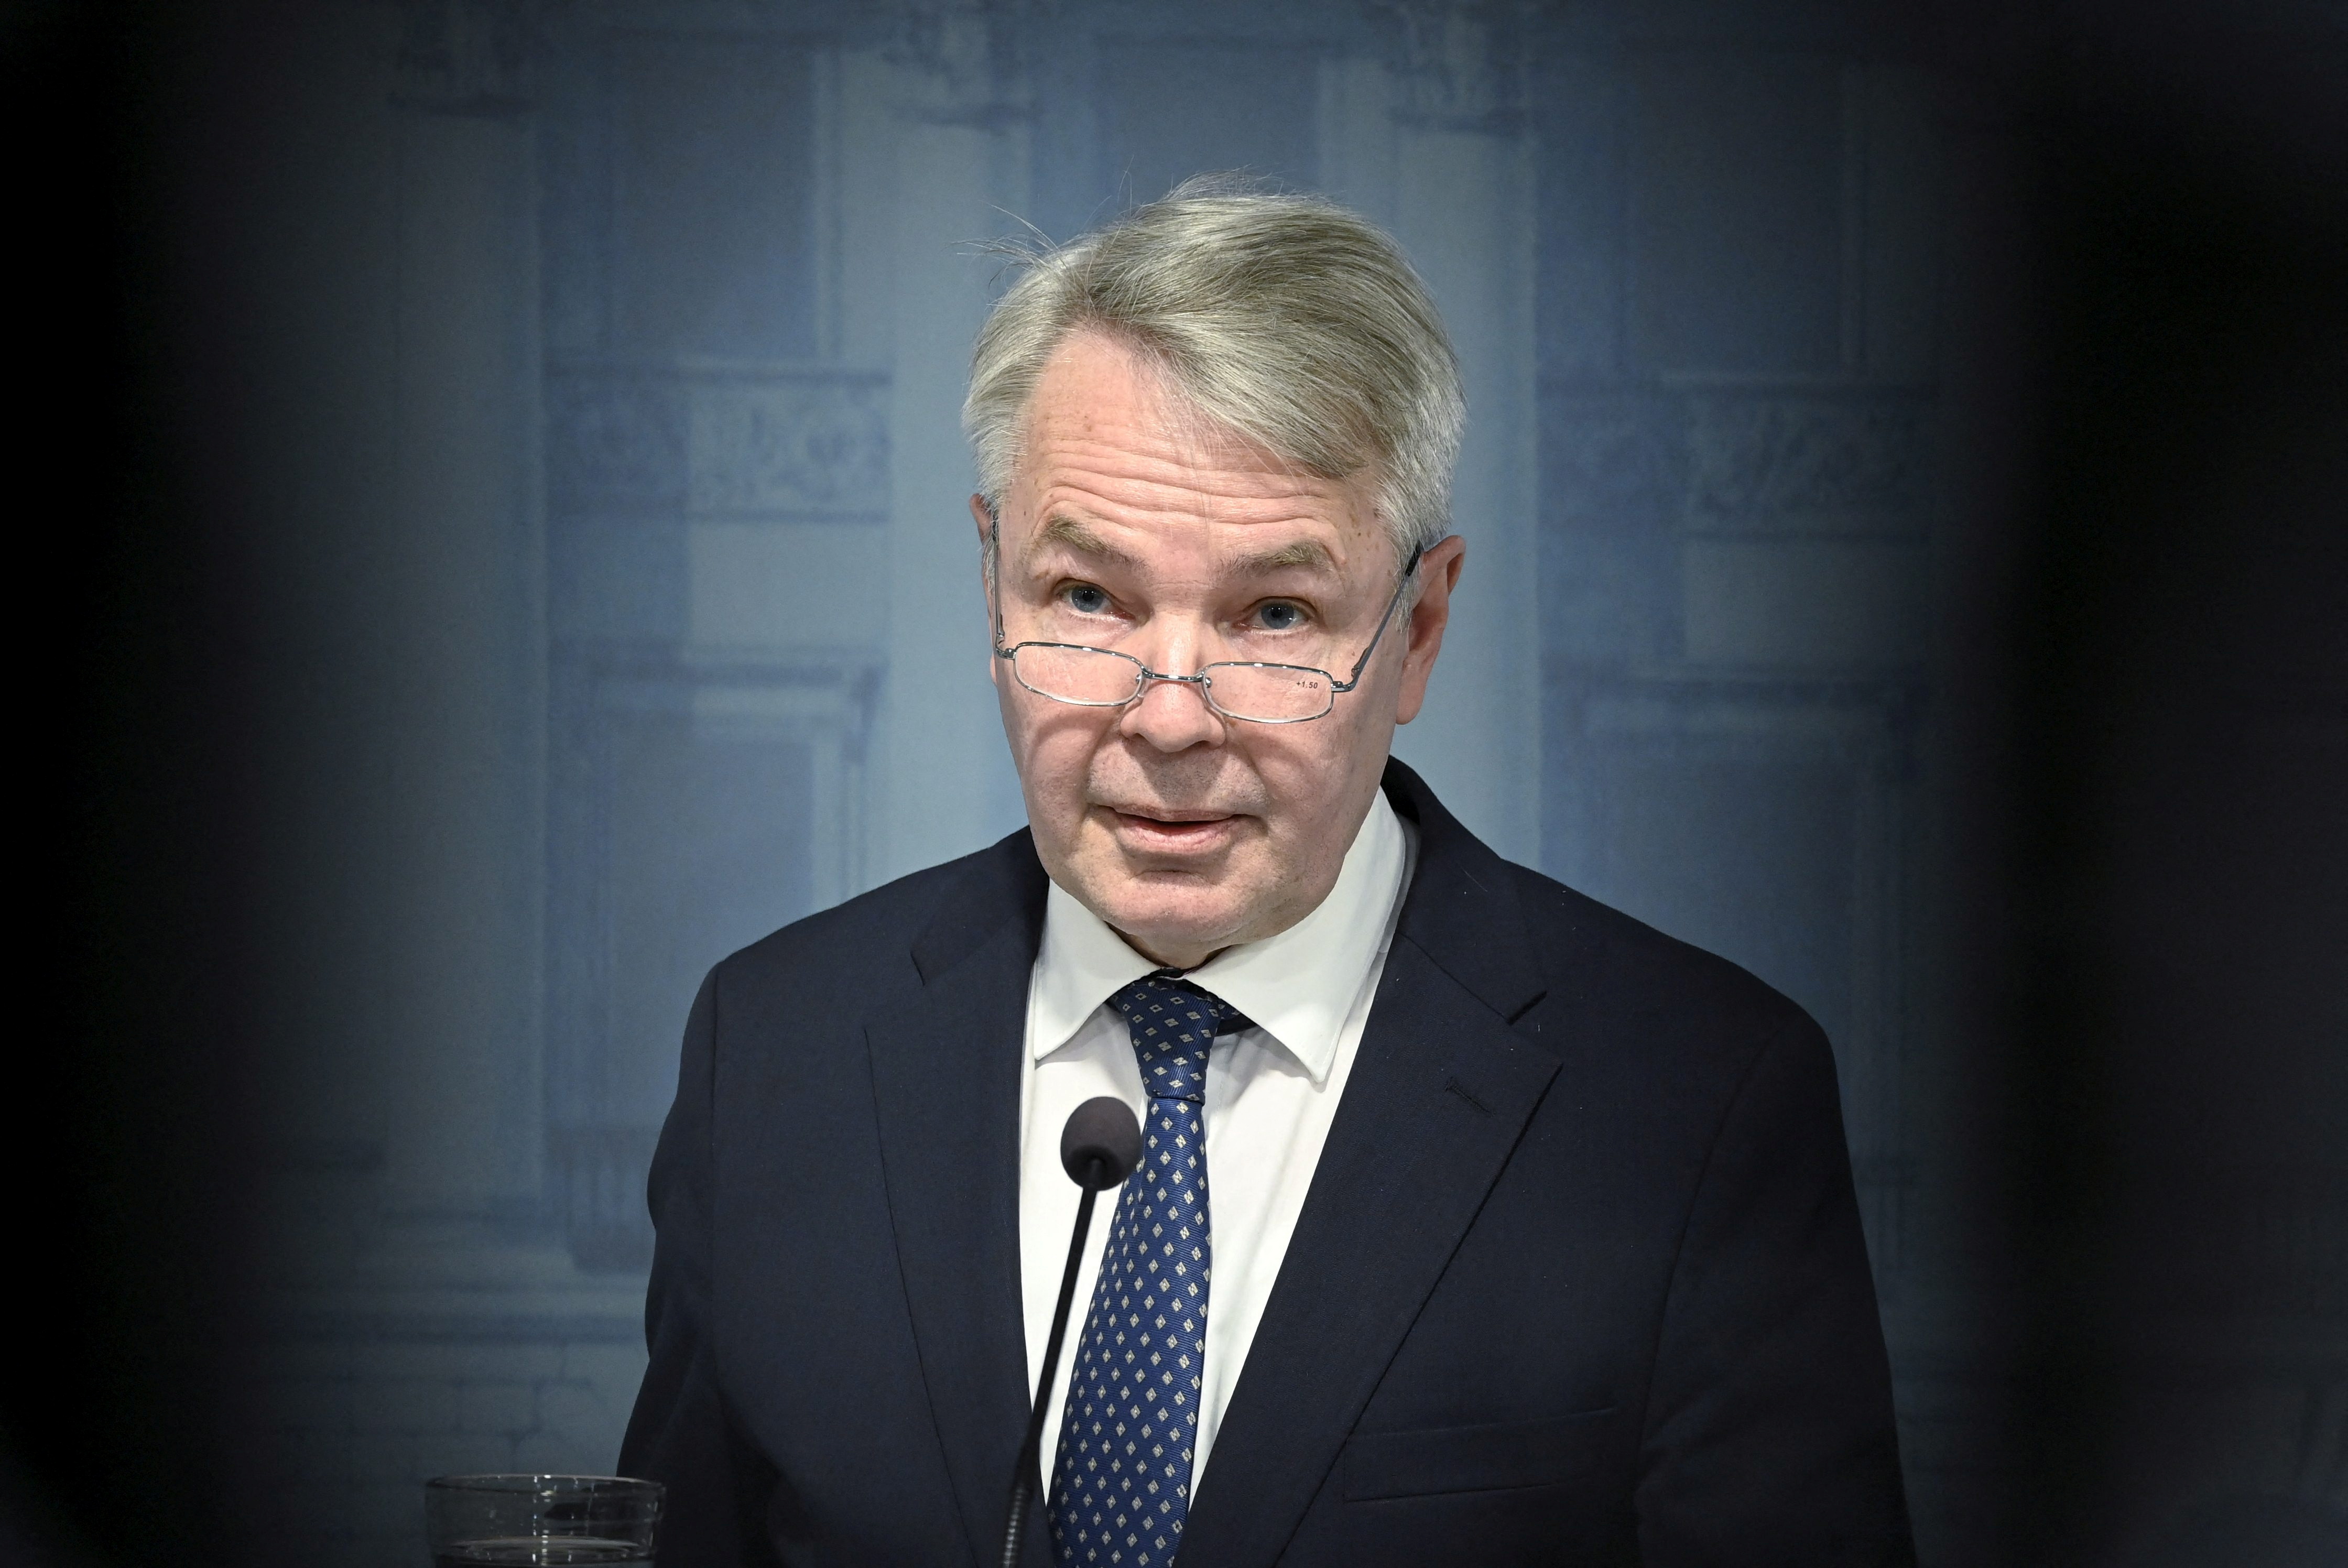 Finland's Foreign Minister Pekka Haavisto and Defence Minister Antti Kaikkonen present the report on changes in the foreign and security policy environment of Finland following Russia's invasion of Ukraine, in Helsinki